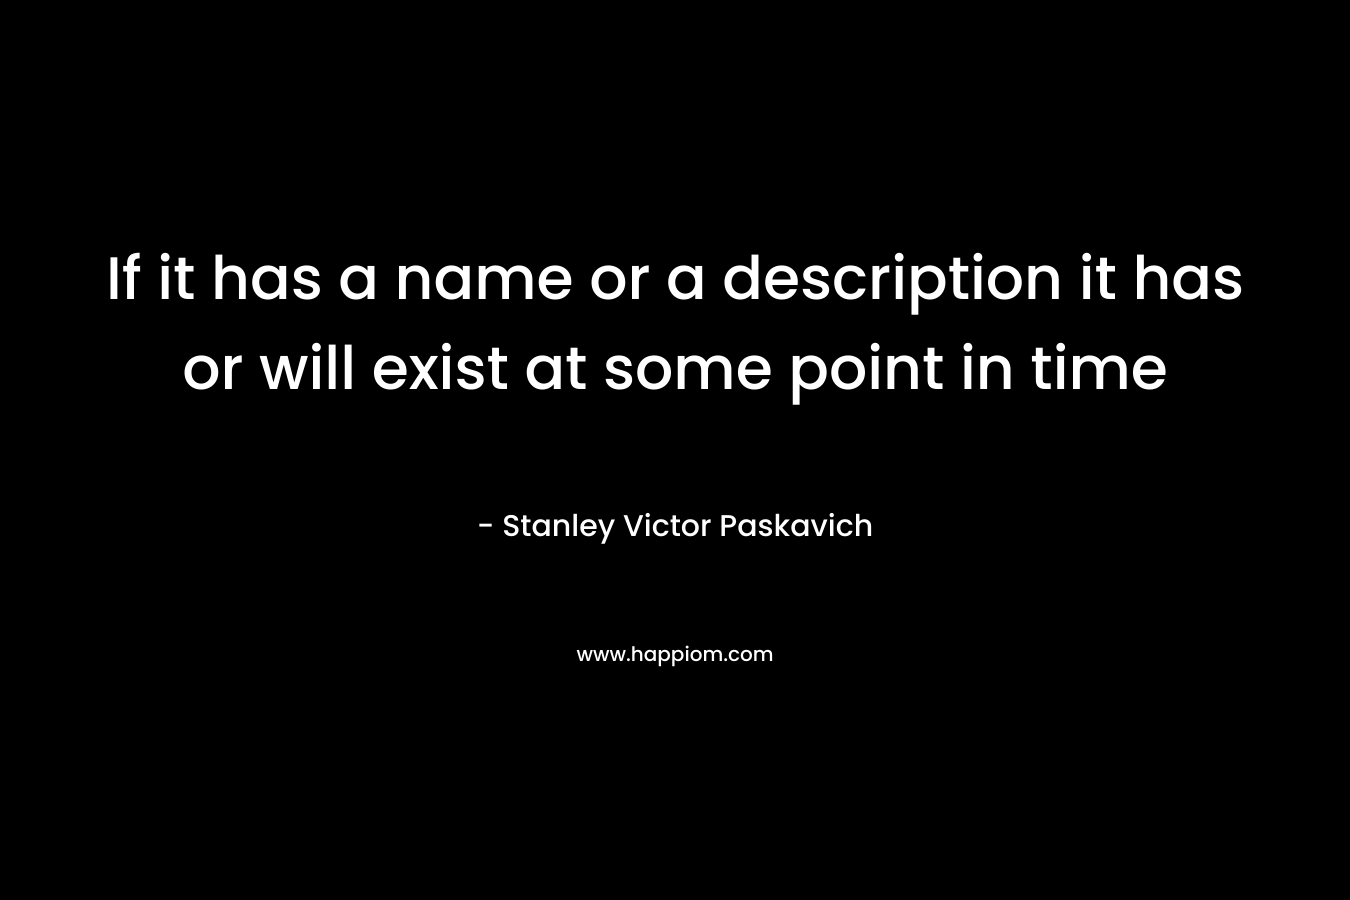 If it has a name or a description it has or will exist at some point in time – Stanley Victor Paskavich